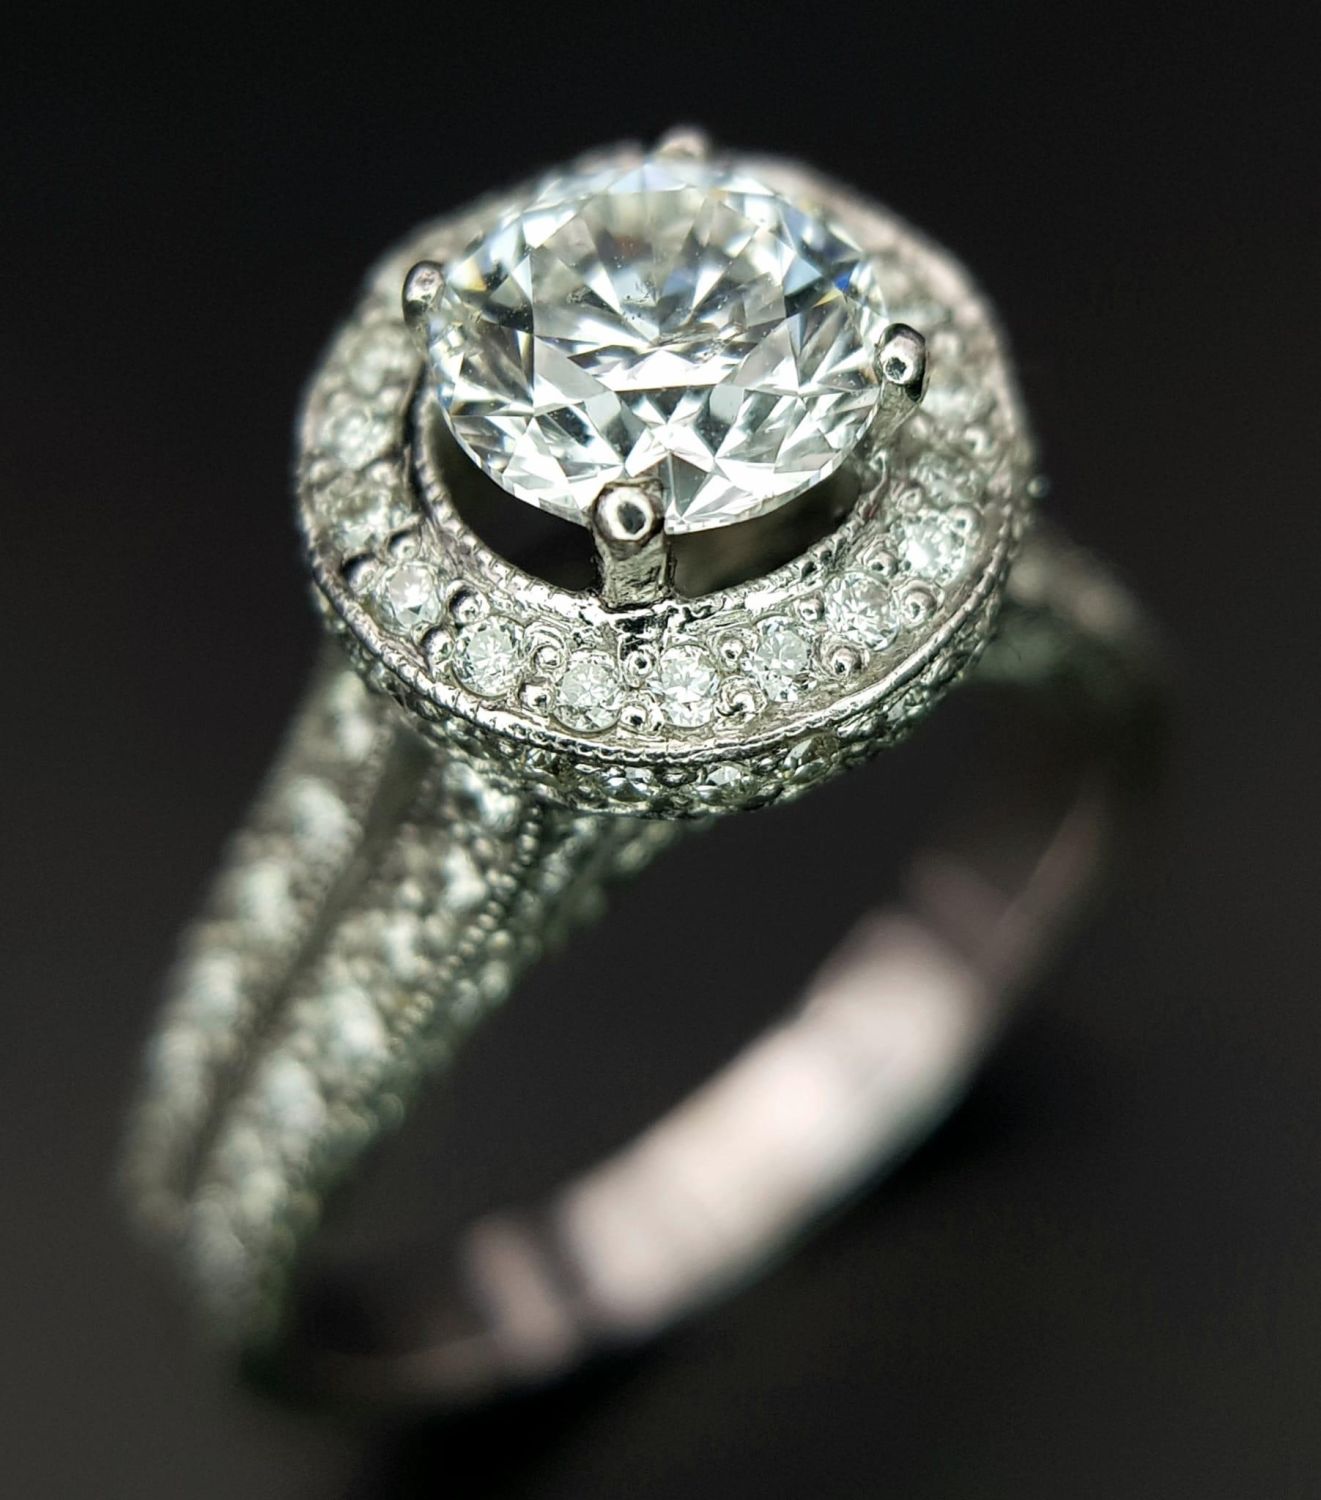 An 18 K white gold ring with a brilliant cut diamond (1.01 carats) surrounded by diamonds on the top - Image 5 of 22